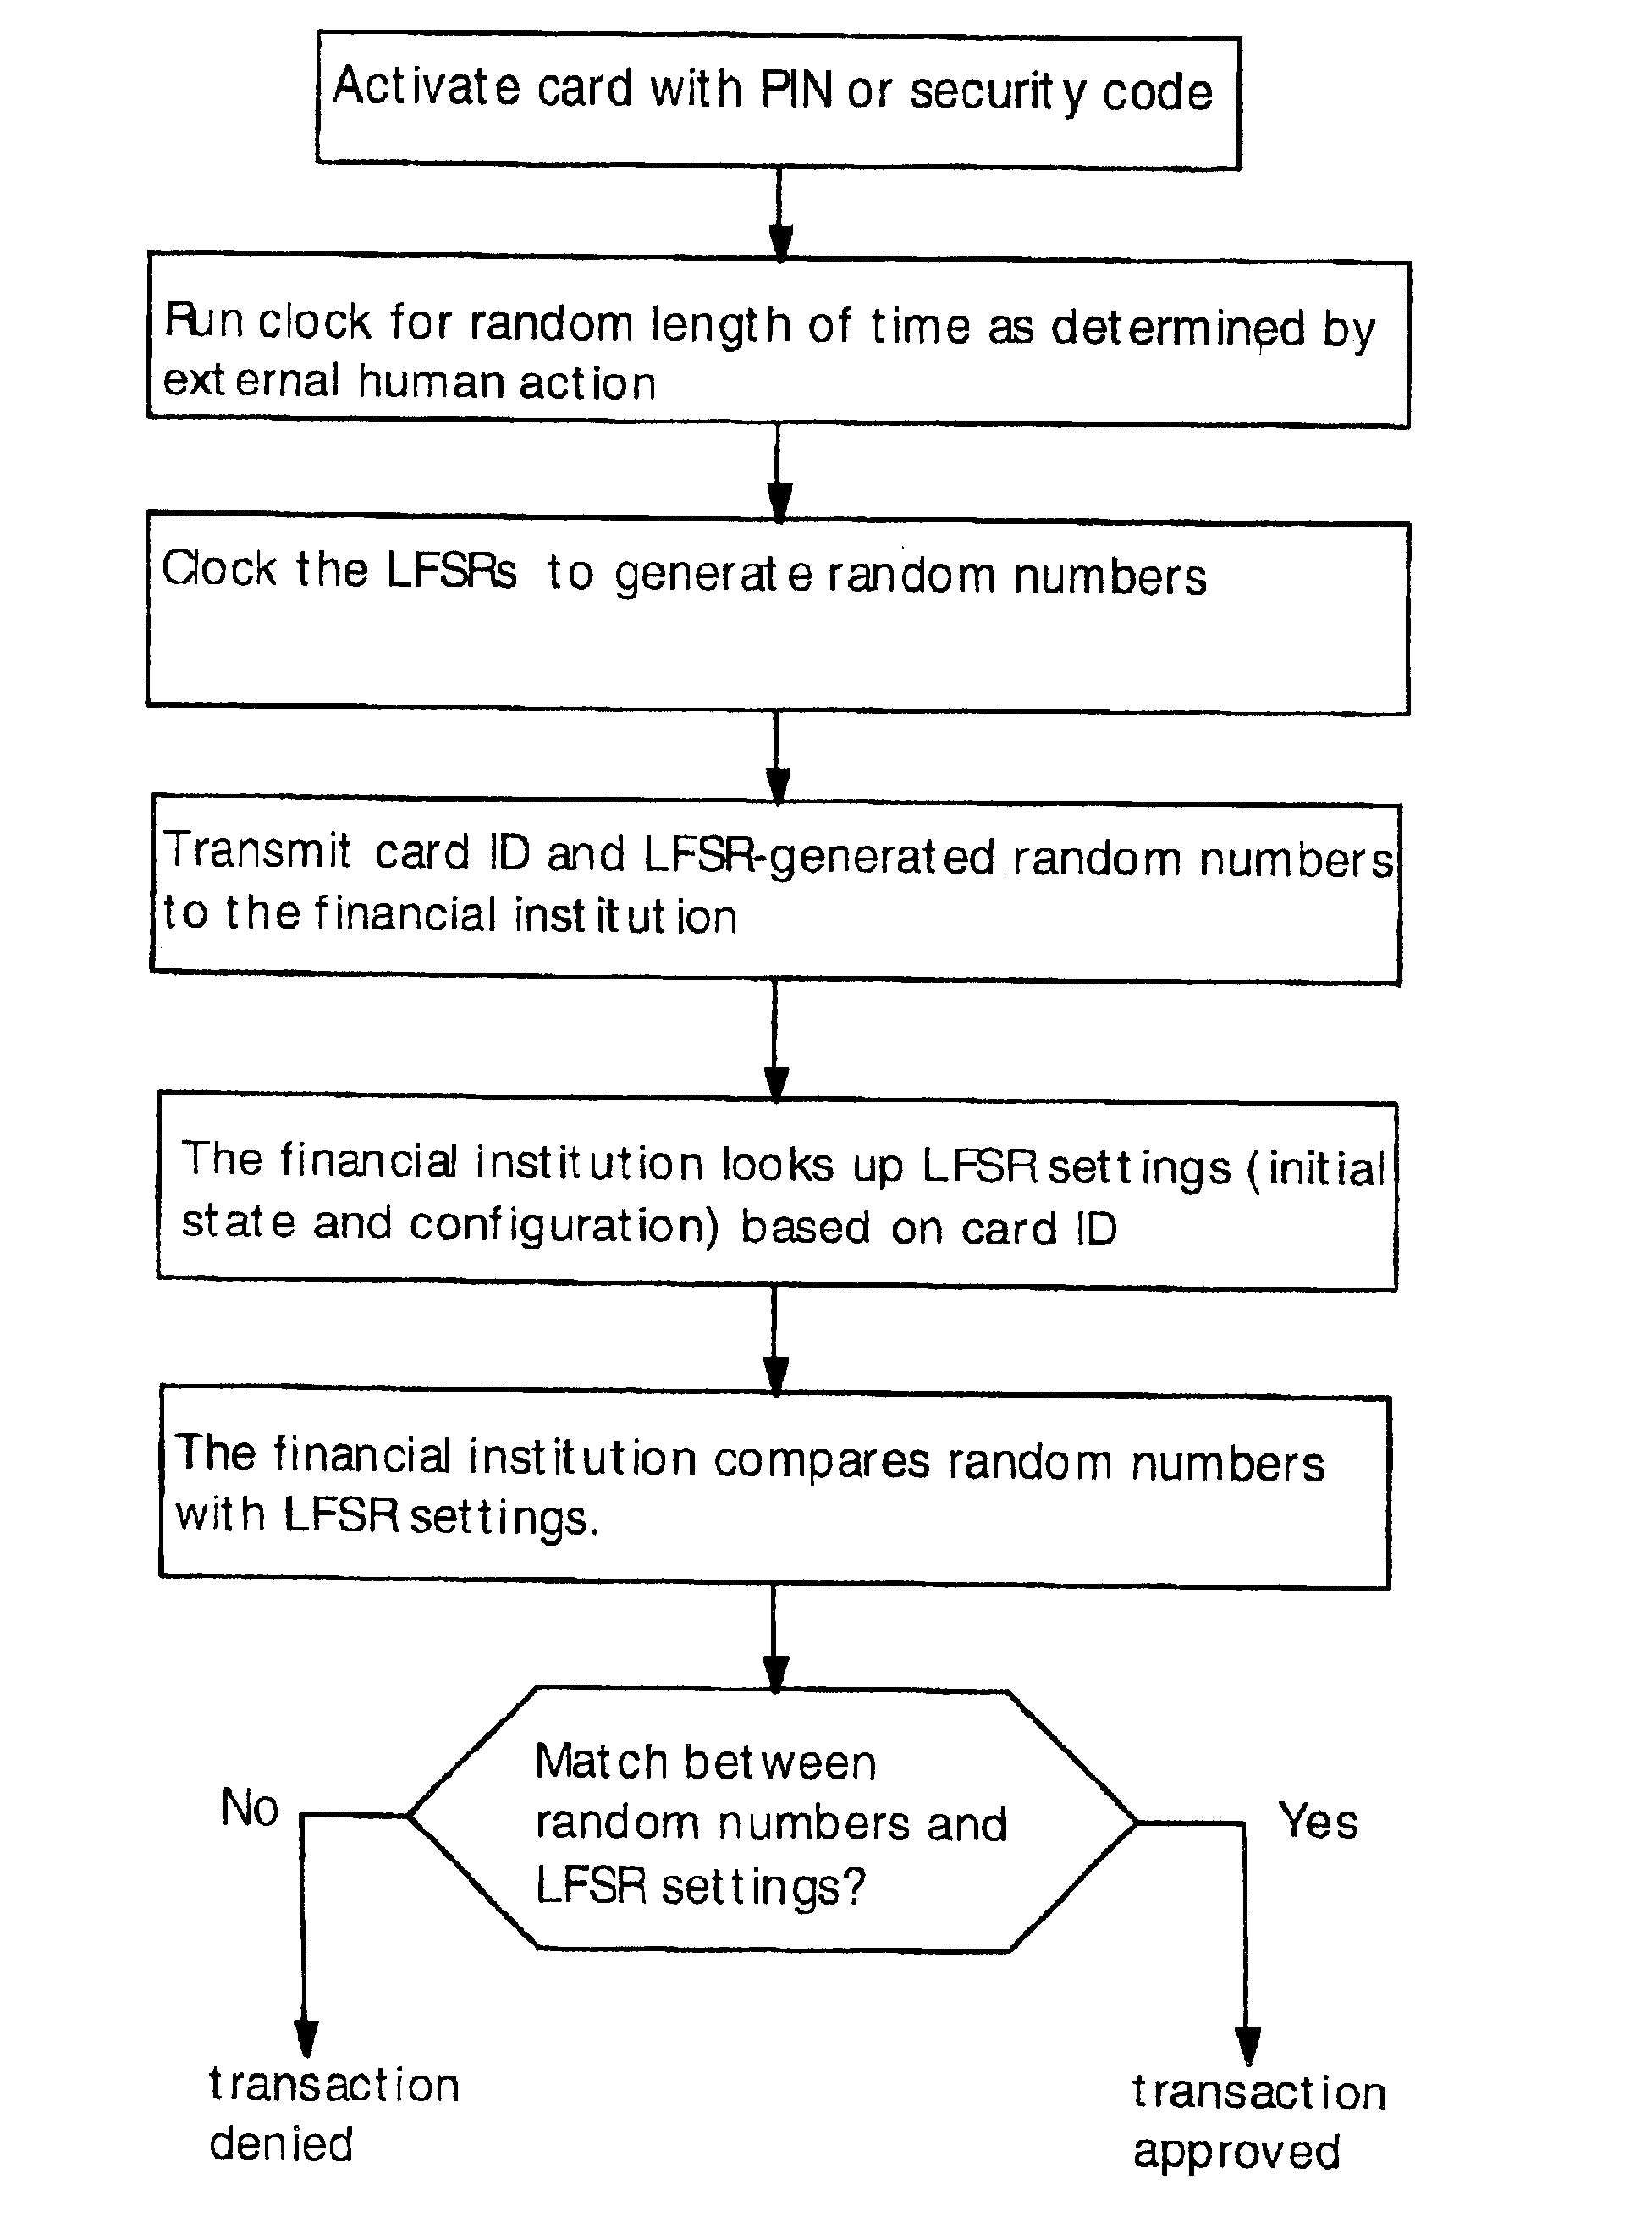 Secure credit card employing pseudo-random bit sequences for authentication